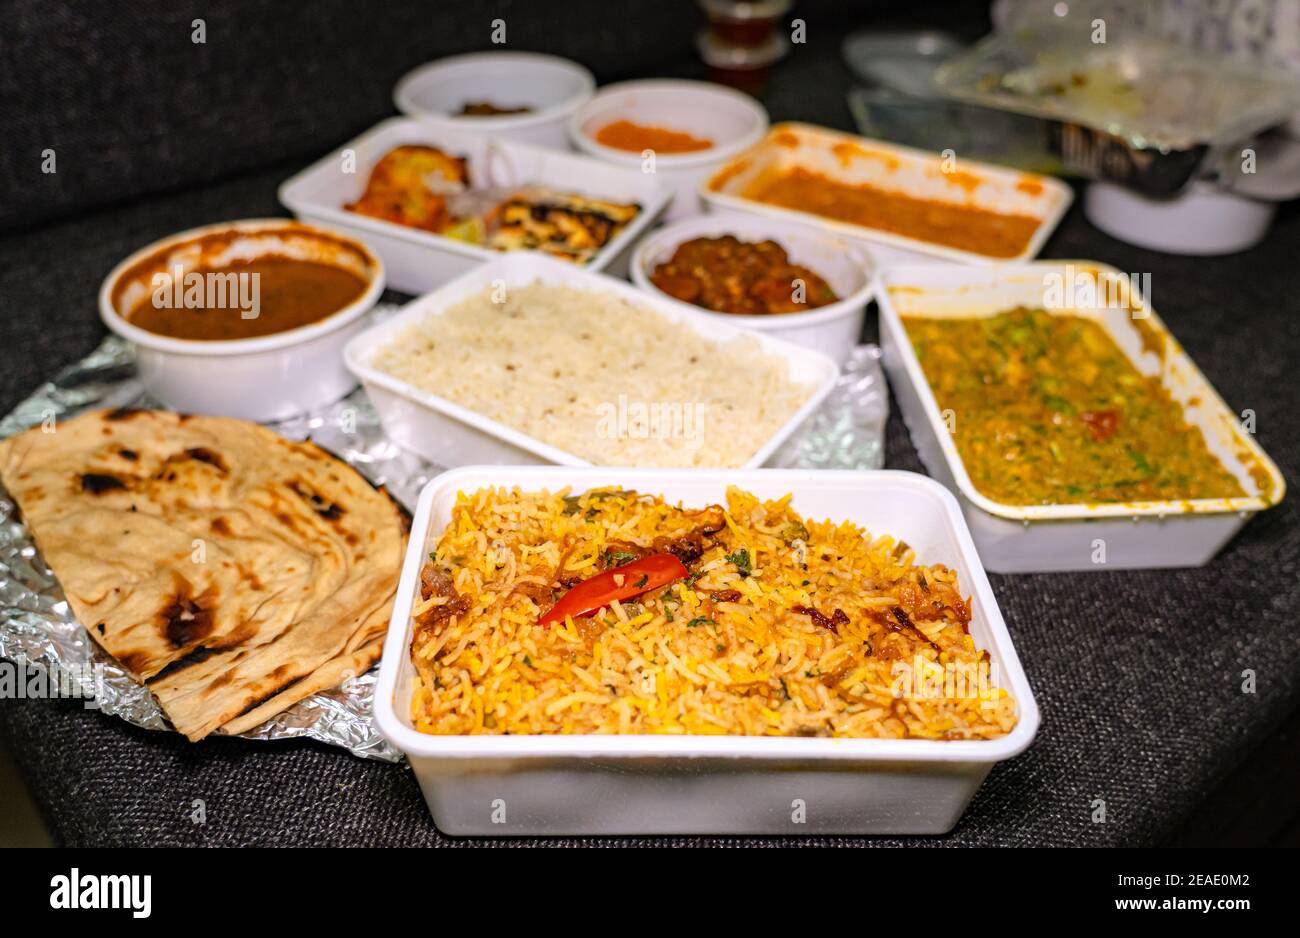 Selective focus of Vegetable Biryani in a white takeout box. Many foods in takeout boxes blurred in the background. Stock Photo